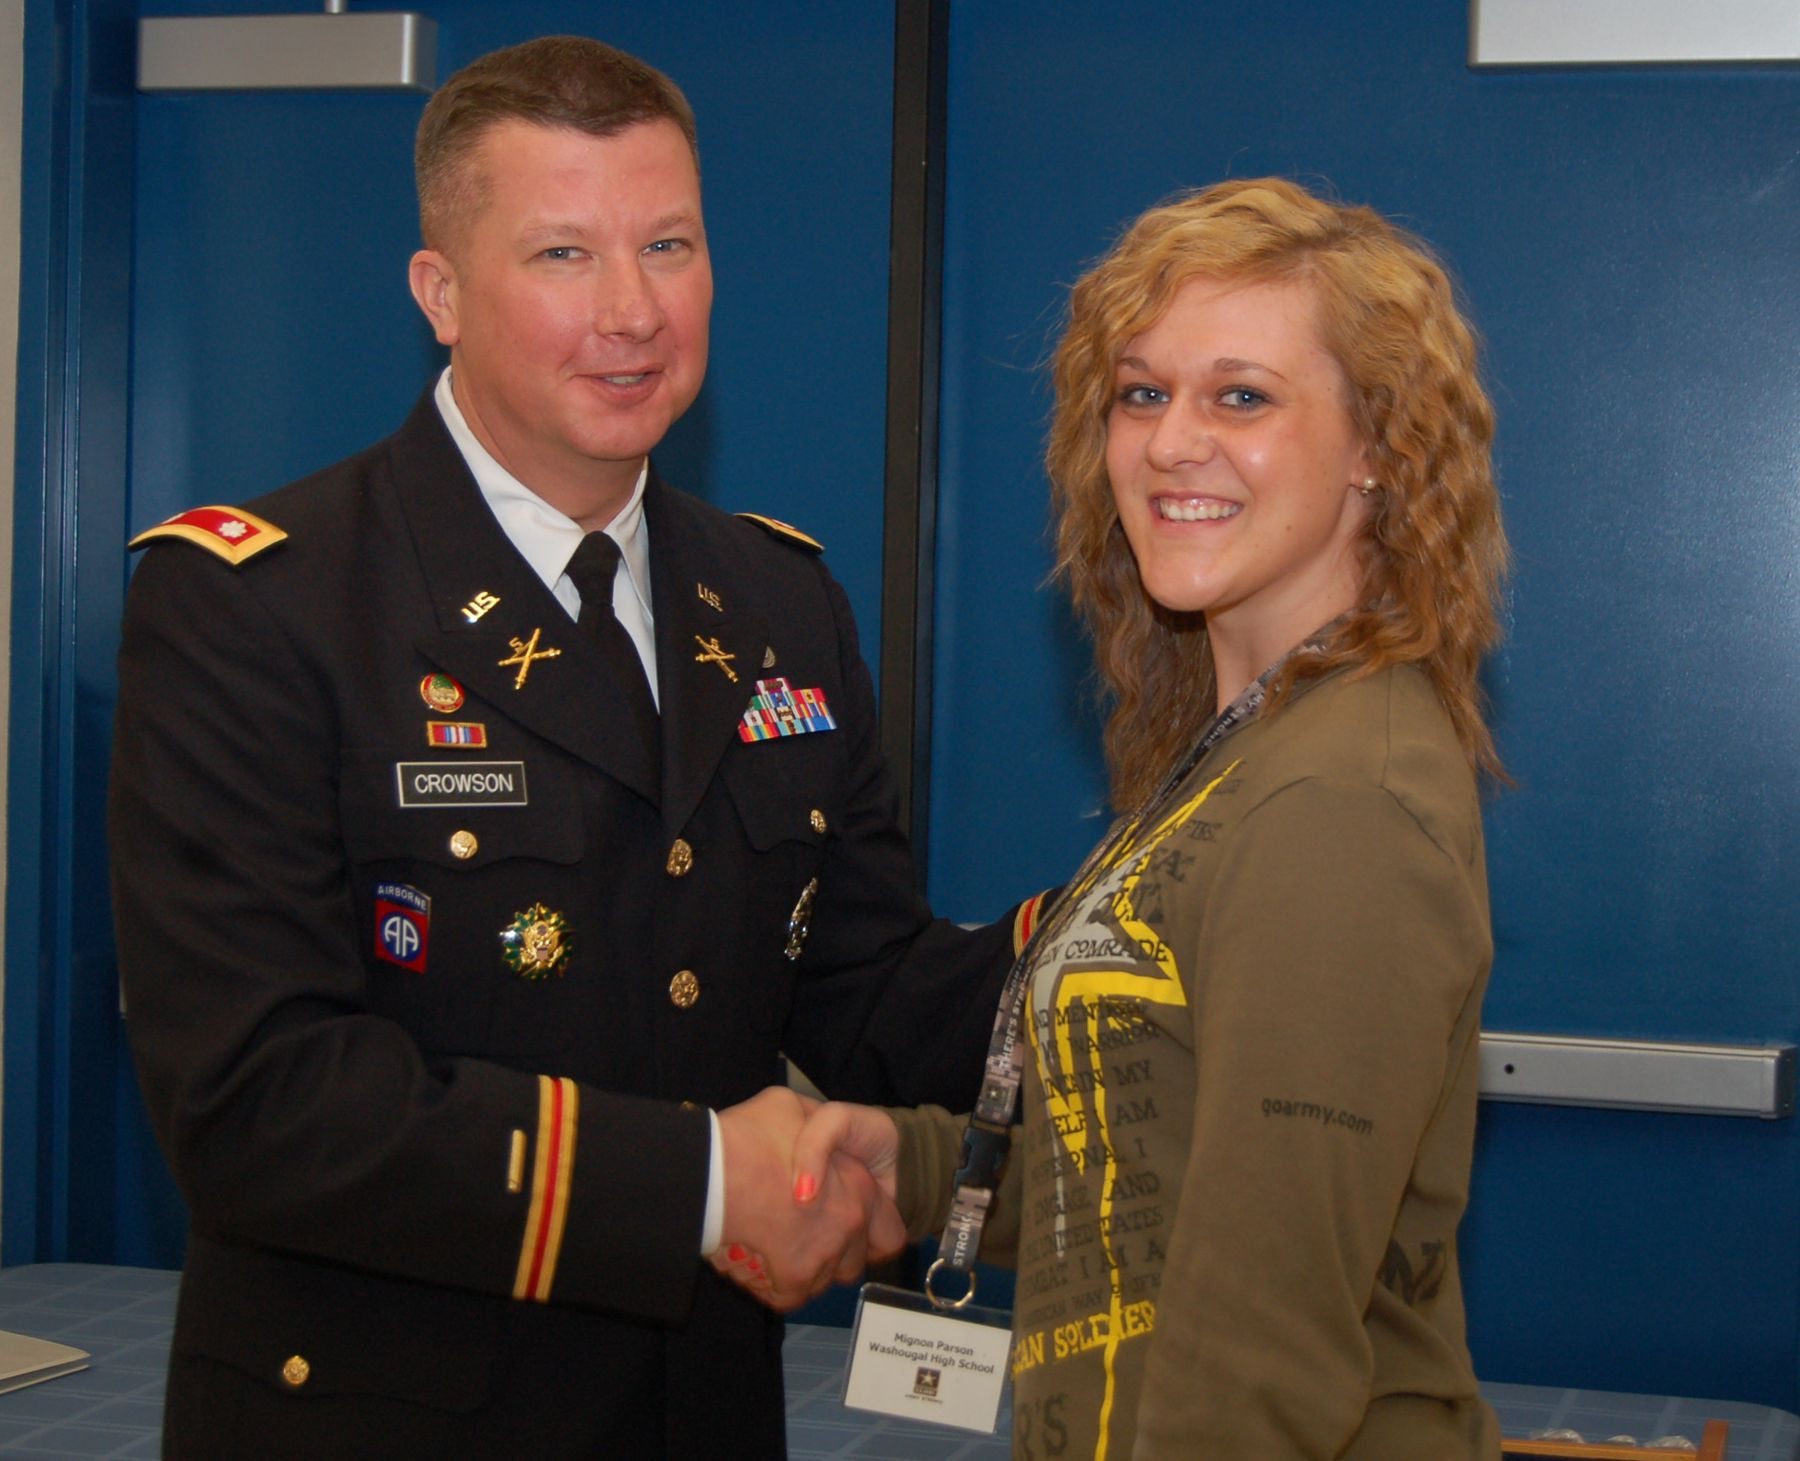 U.S. Army Future Soldier Mignon Parson from Washougal High School receives Military coin from U.S. Army Recruiting Battalion Portland Commander Lt. Col.